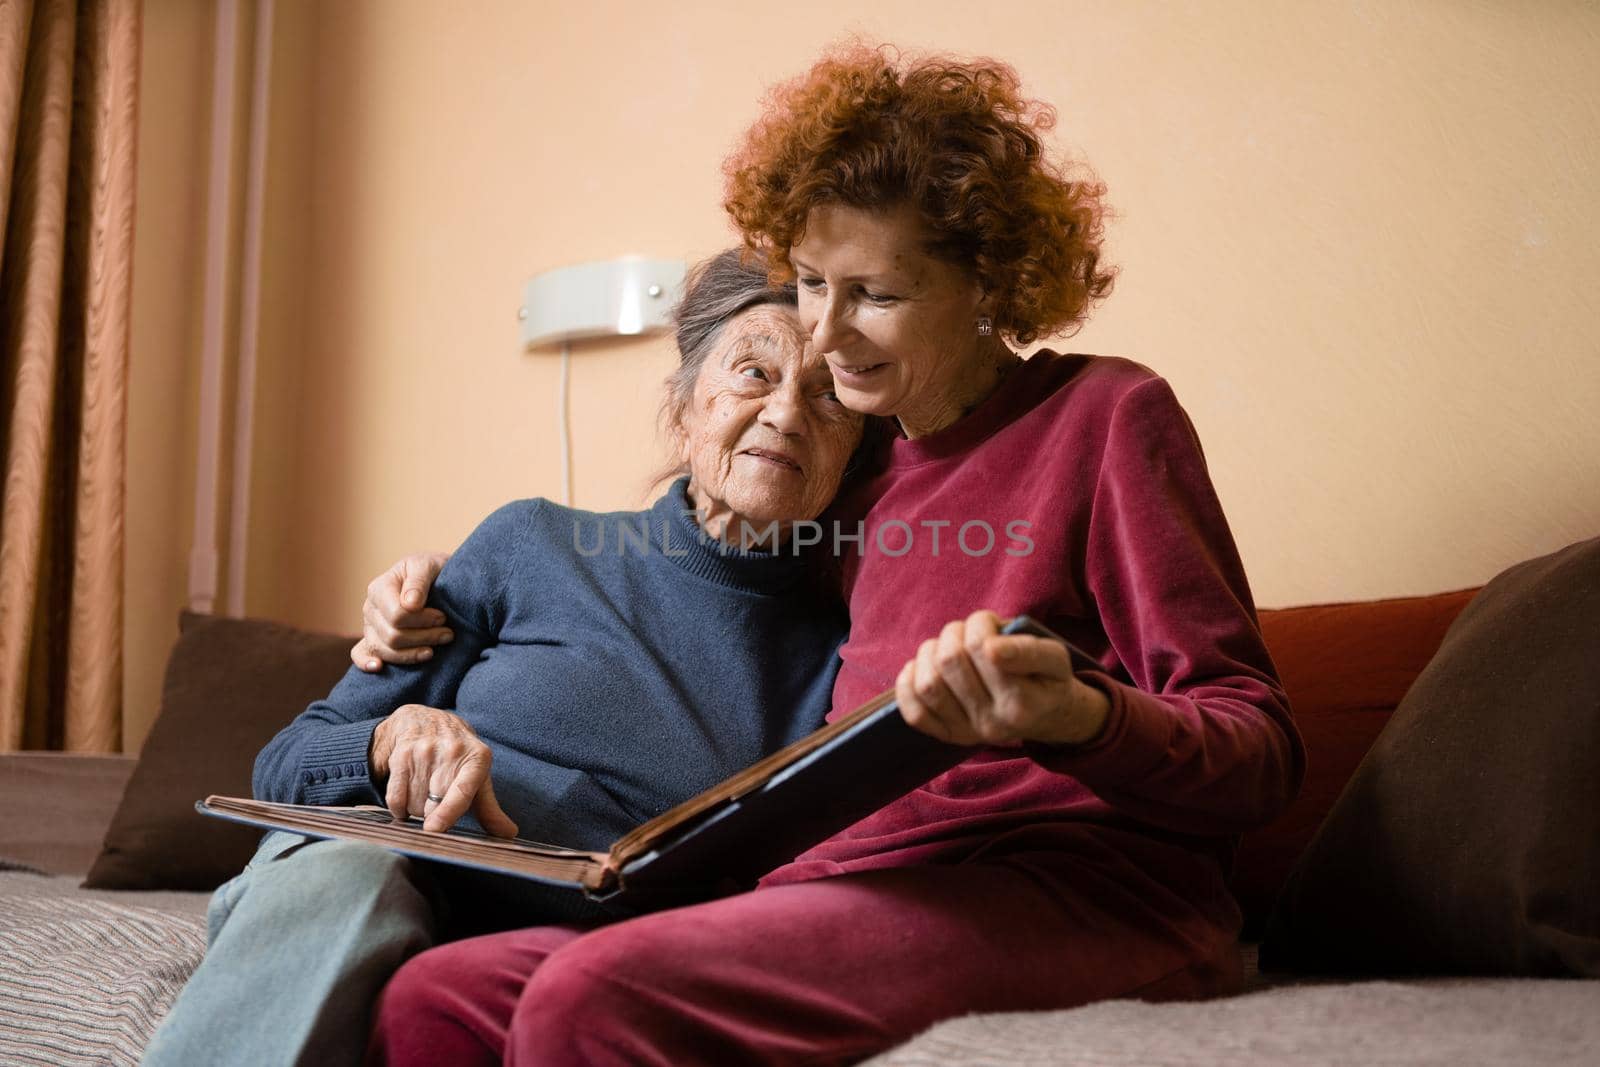 Mature daughter visits senior mother and has fun watching family photo album, sitting in embrace in living room couch. Mothers Day. Elderly woman and old gray hair grandmother laugh, remember youth by Tomashevska